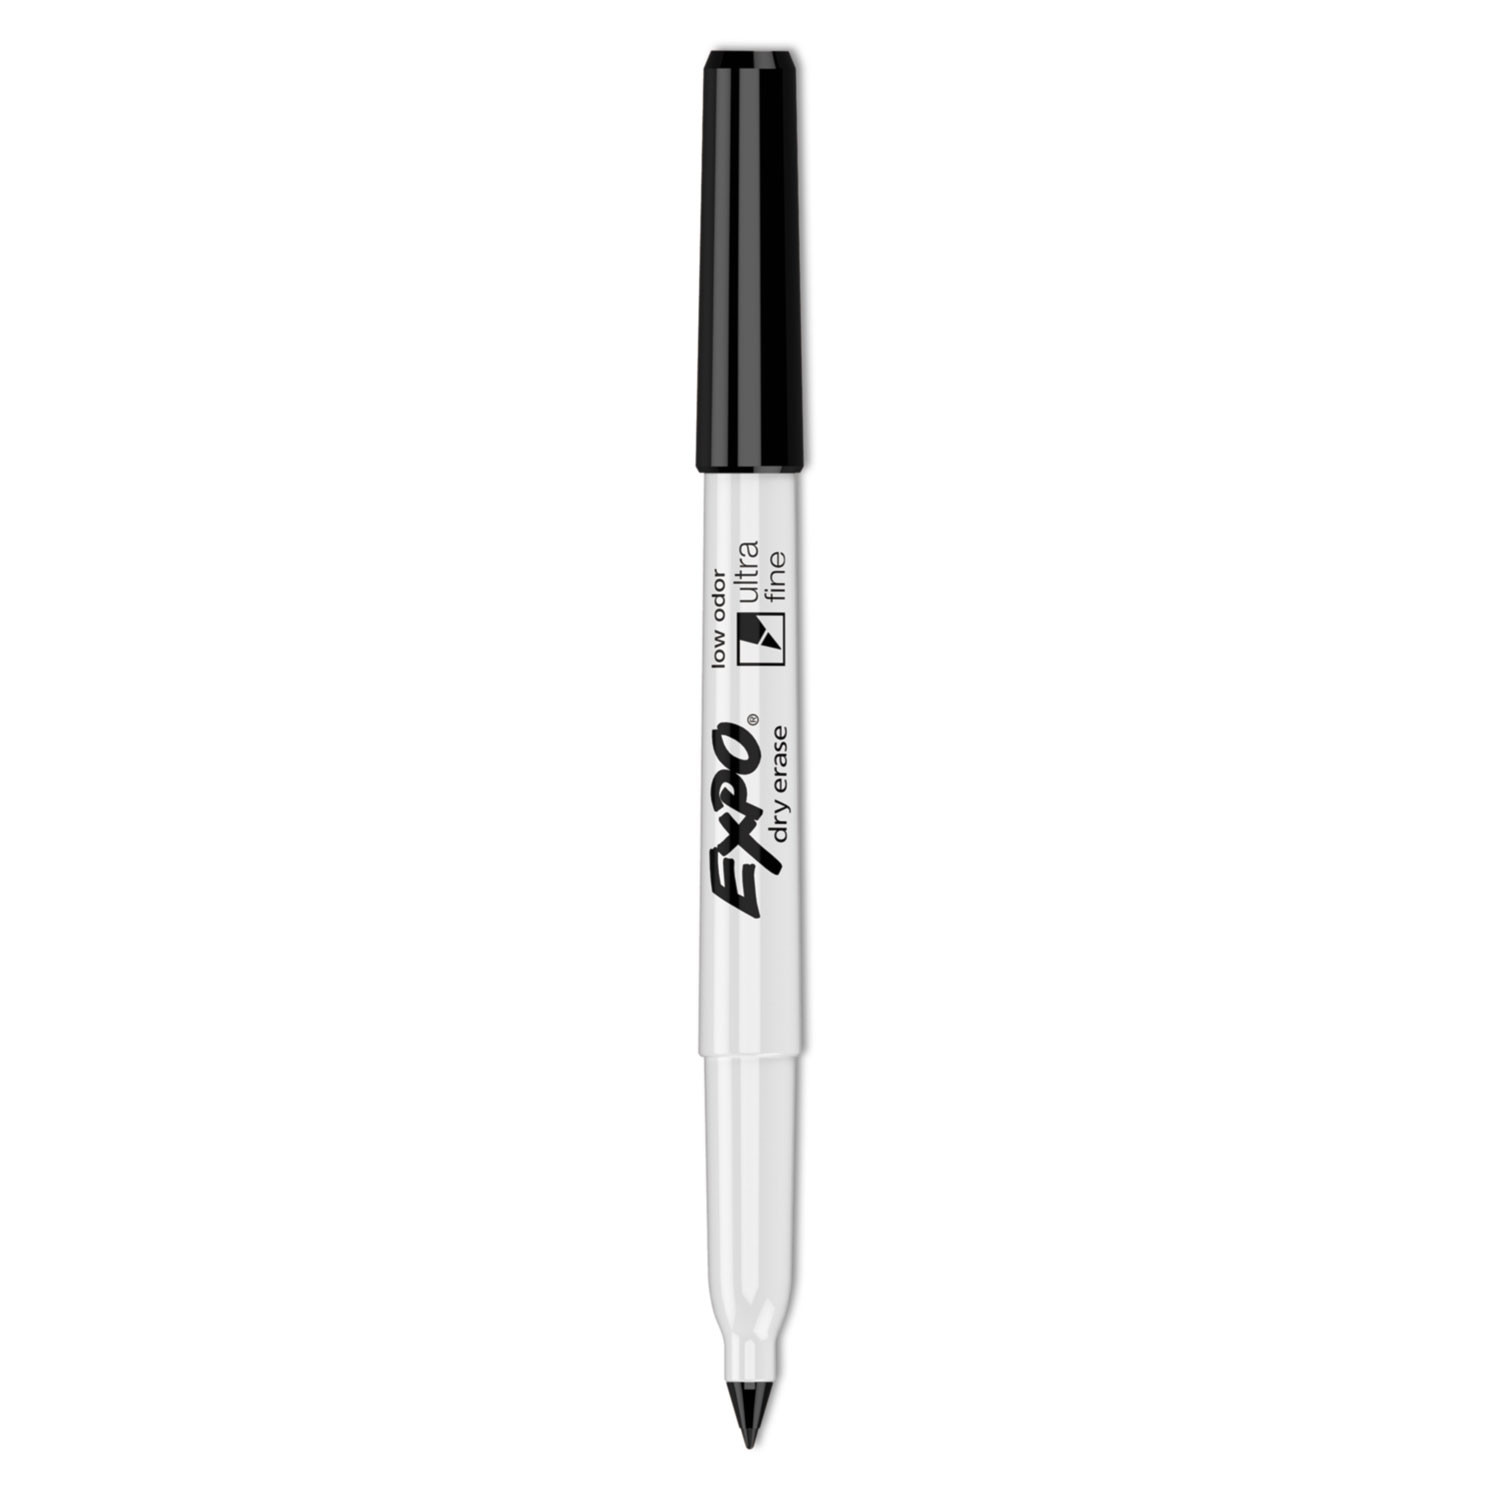 Expo Dry Erase Black Ultra Fine Low Odor MarkerPens and Pencils